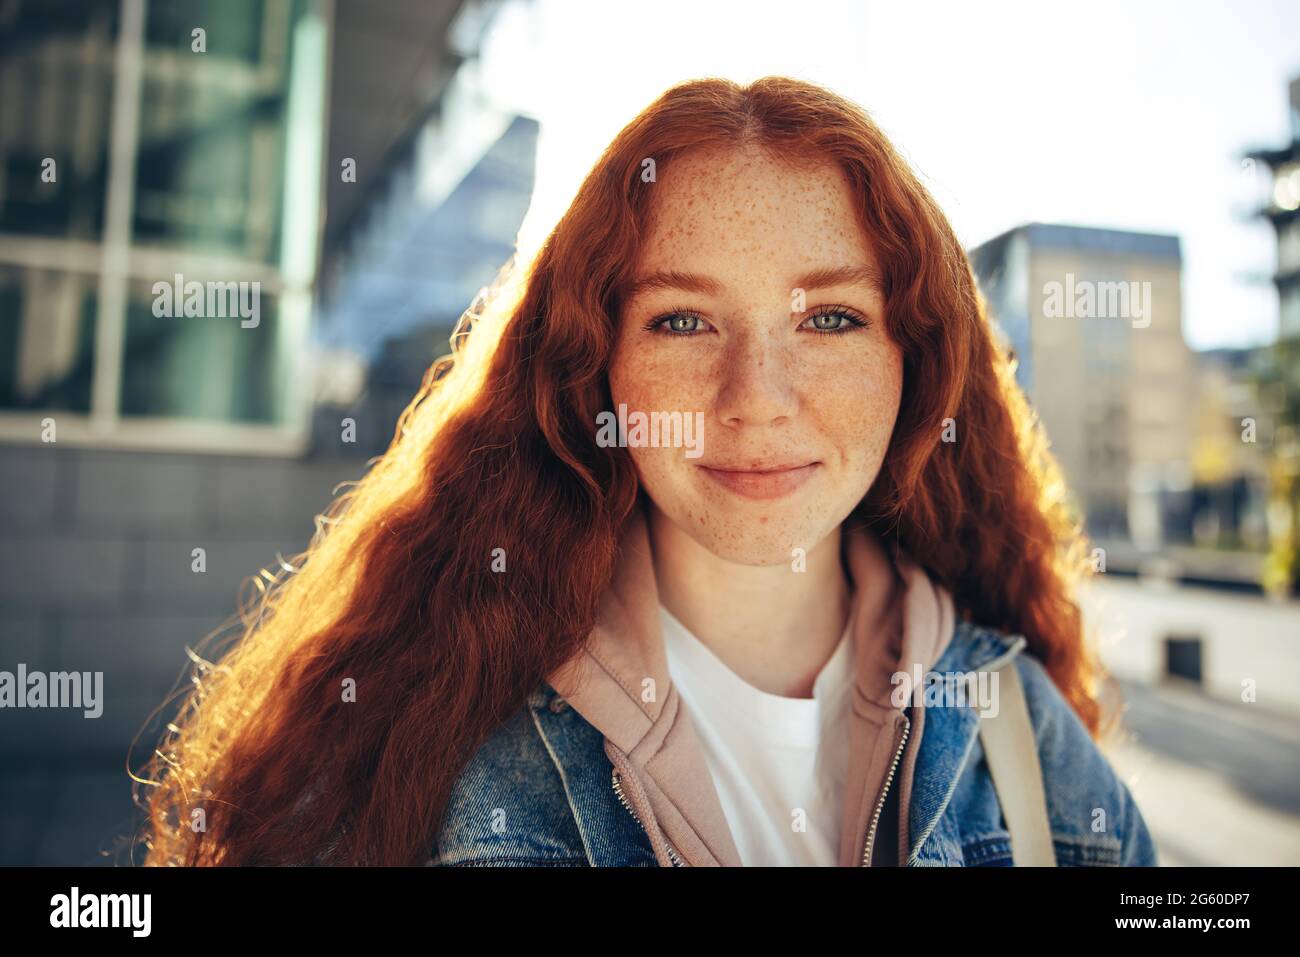 Portrait of young woman in casual wears and red dyed hair outdoors. Female student standing outside looking at camera. Stock Photo